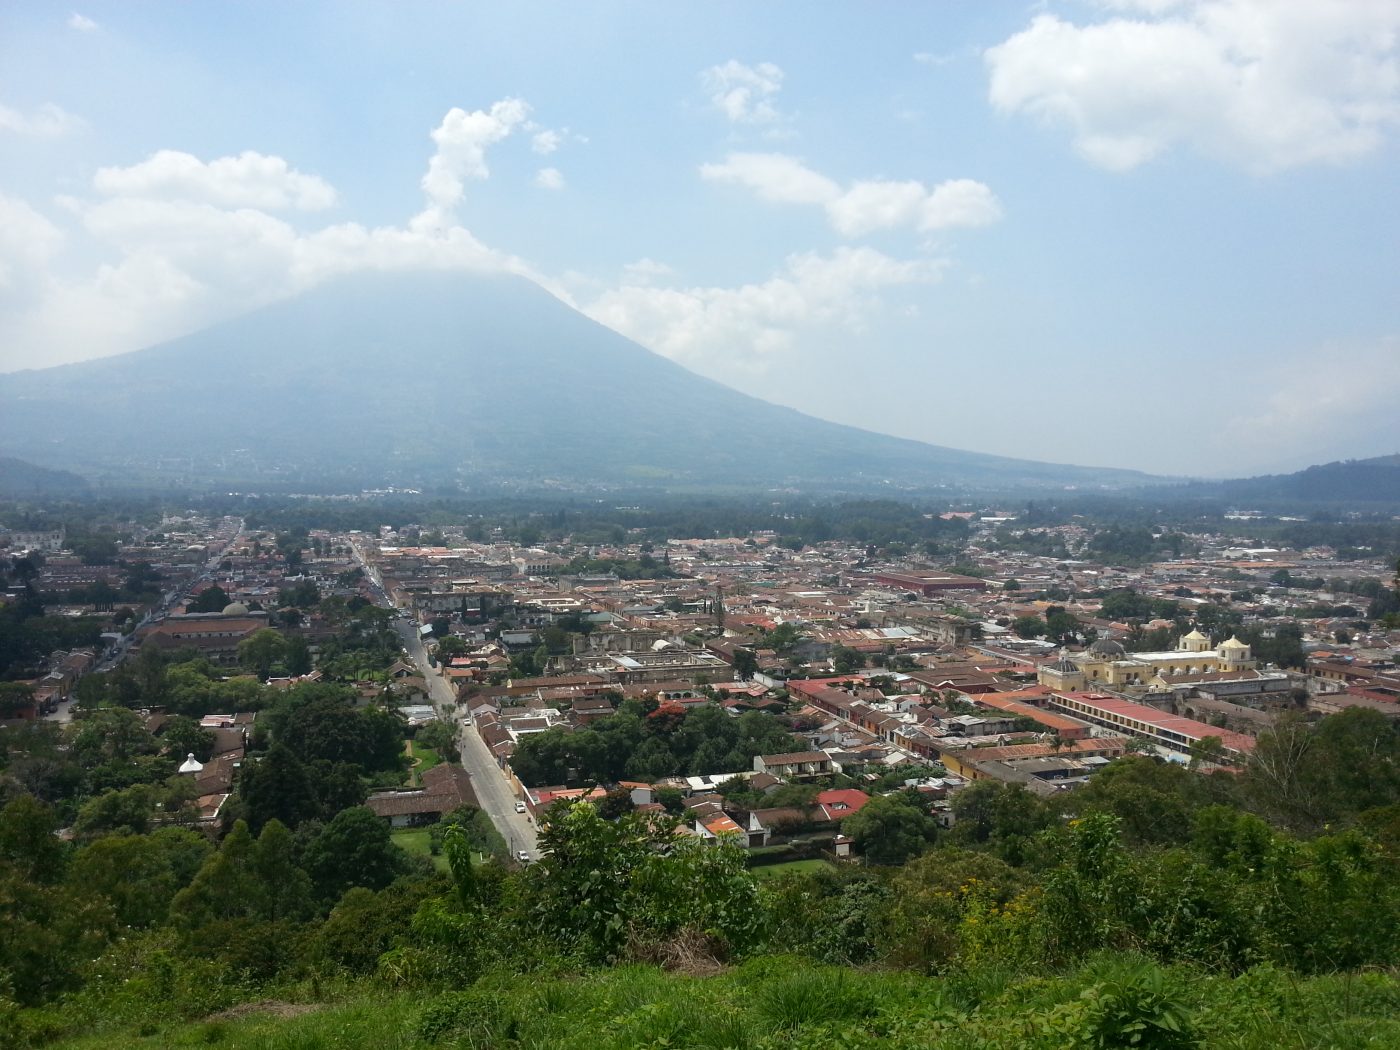 Things to do in Guatemala as a Solo Female Traveler